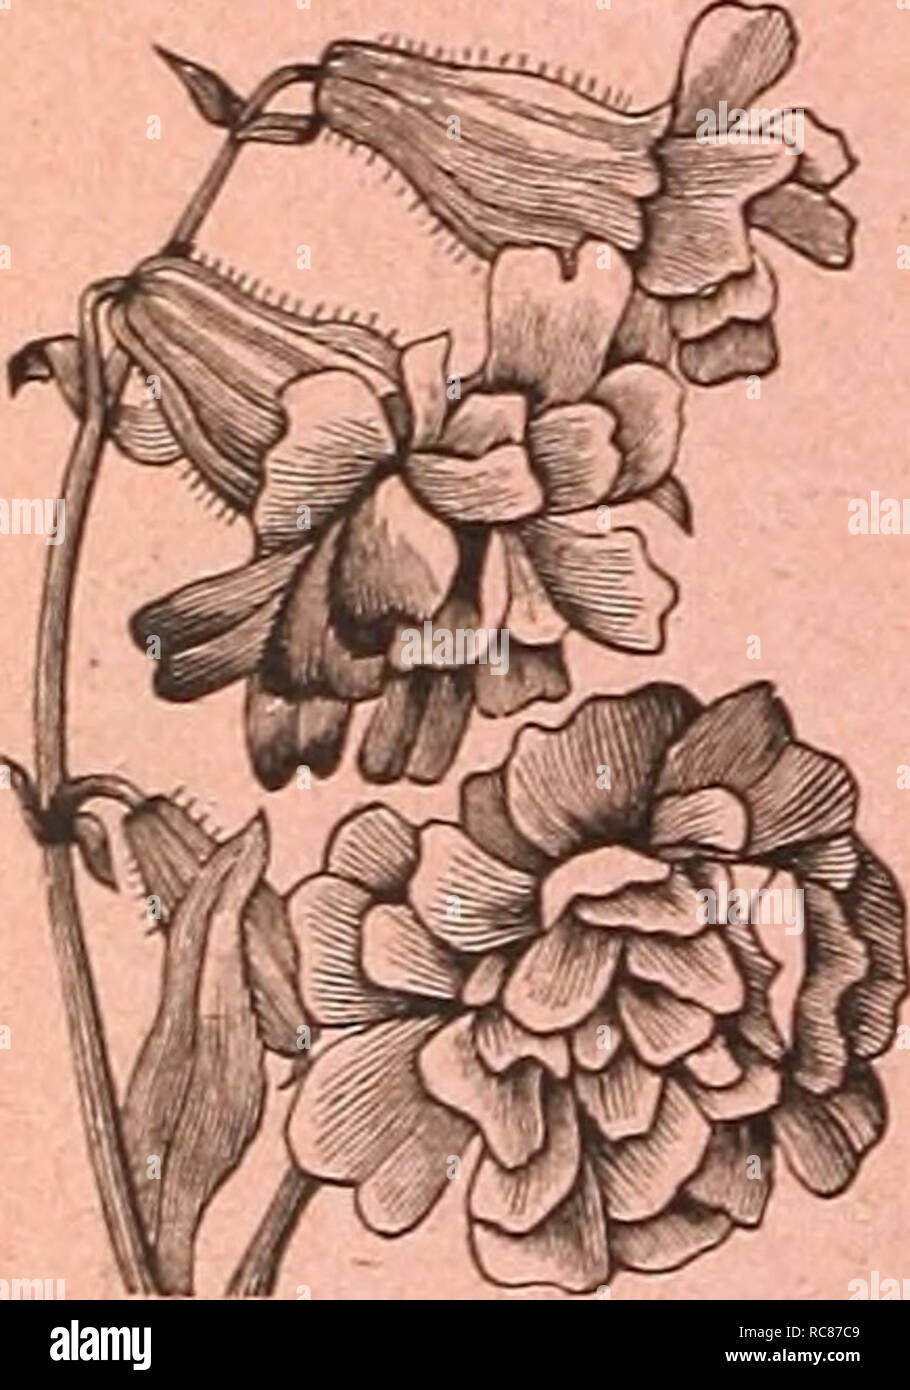 . Dreer's garden calendar : 1886. Seeds Catalogs; Nursery stock Catalogs; Gardening Catalogs; Flowers Seeds Catalogs; Gardening Equipment and supplies Catalogs. PHLOX DRUMMONDI COCCINEA FL. SEMI PLENO. No. 6353. Although there are already almost innumer- able varieties of this popular annual in cultivation, we do not doubt but that this new variety, which is probably the first introduced with semi-double and double flowers, will soon orain its admirers. The plants grow more compact than the old scarlet single flowered variety ; the trusses and the individual flowers are equal in size to those  Stock Photo